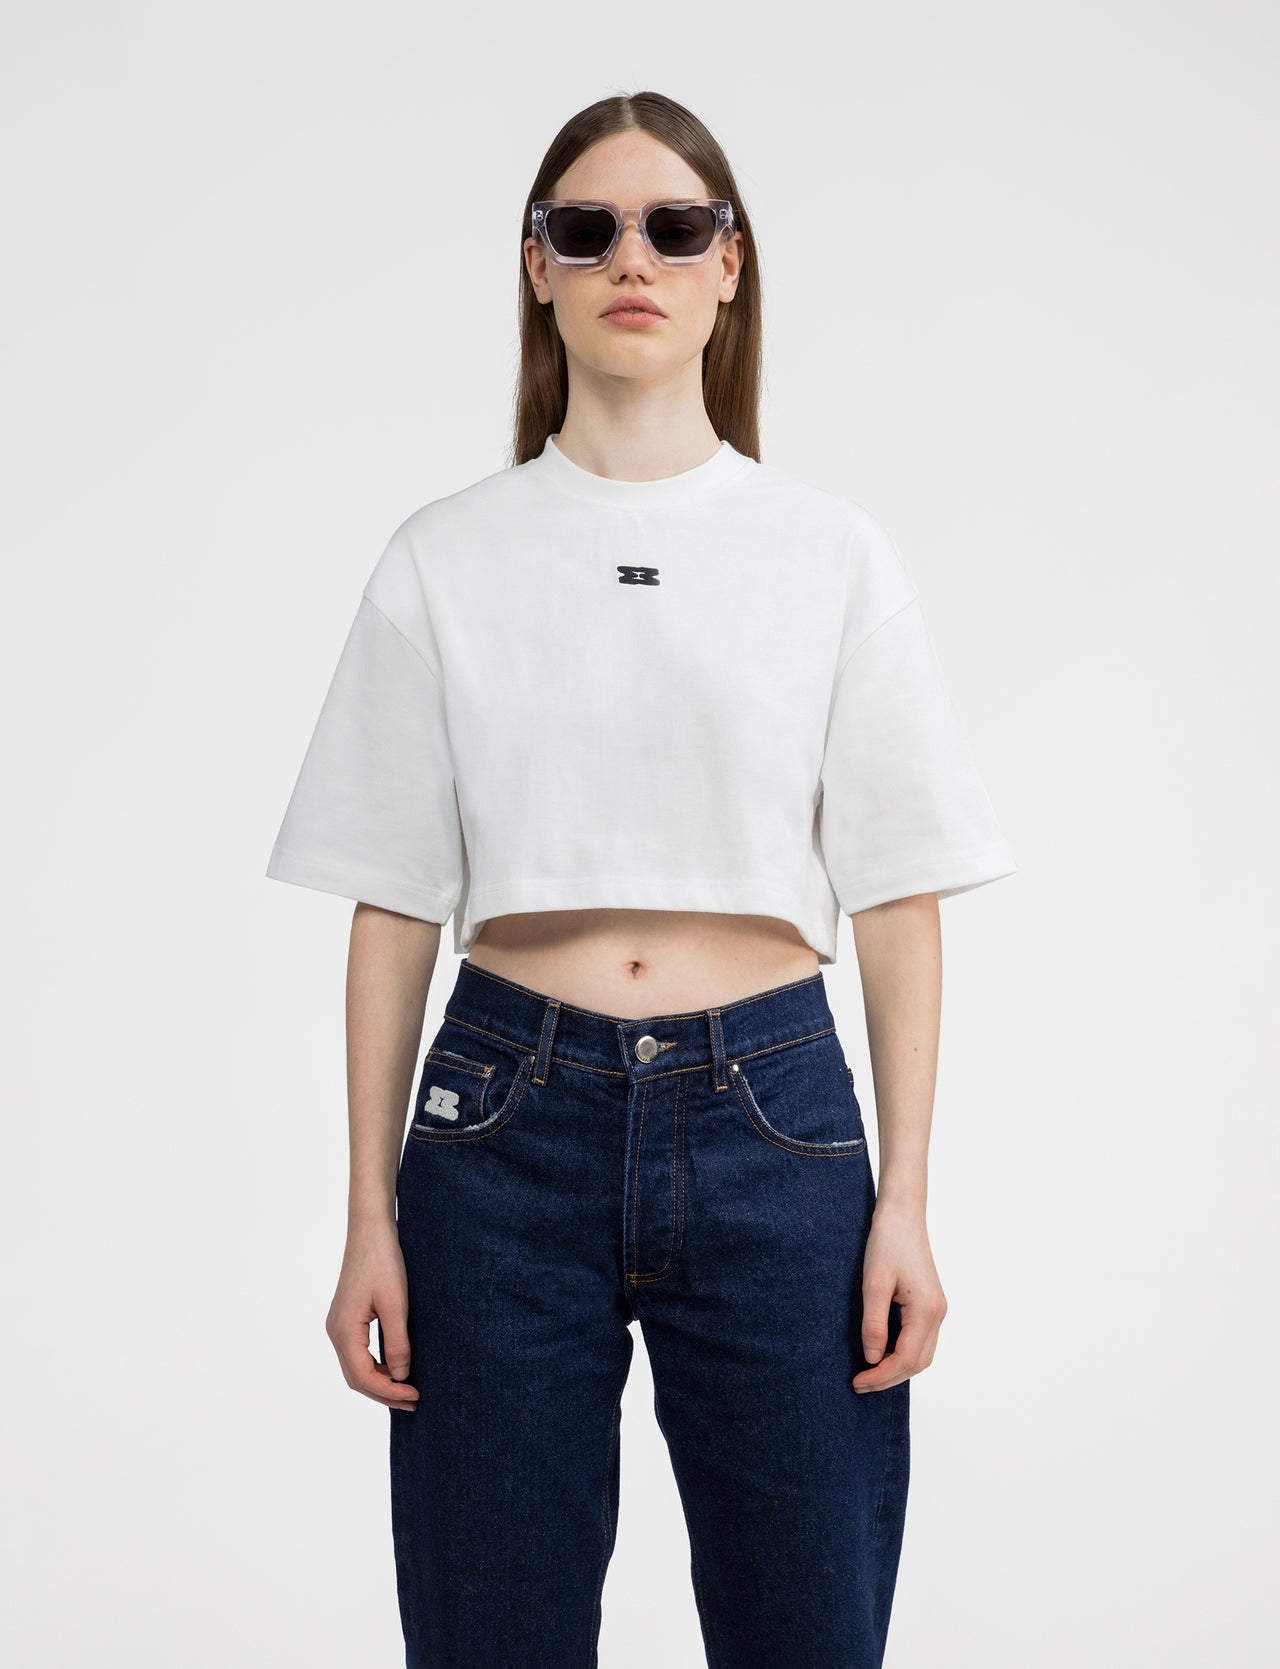 Hourglass t-shirt cropped white